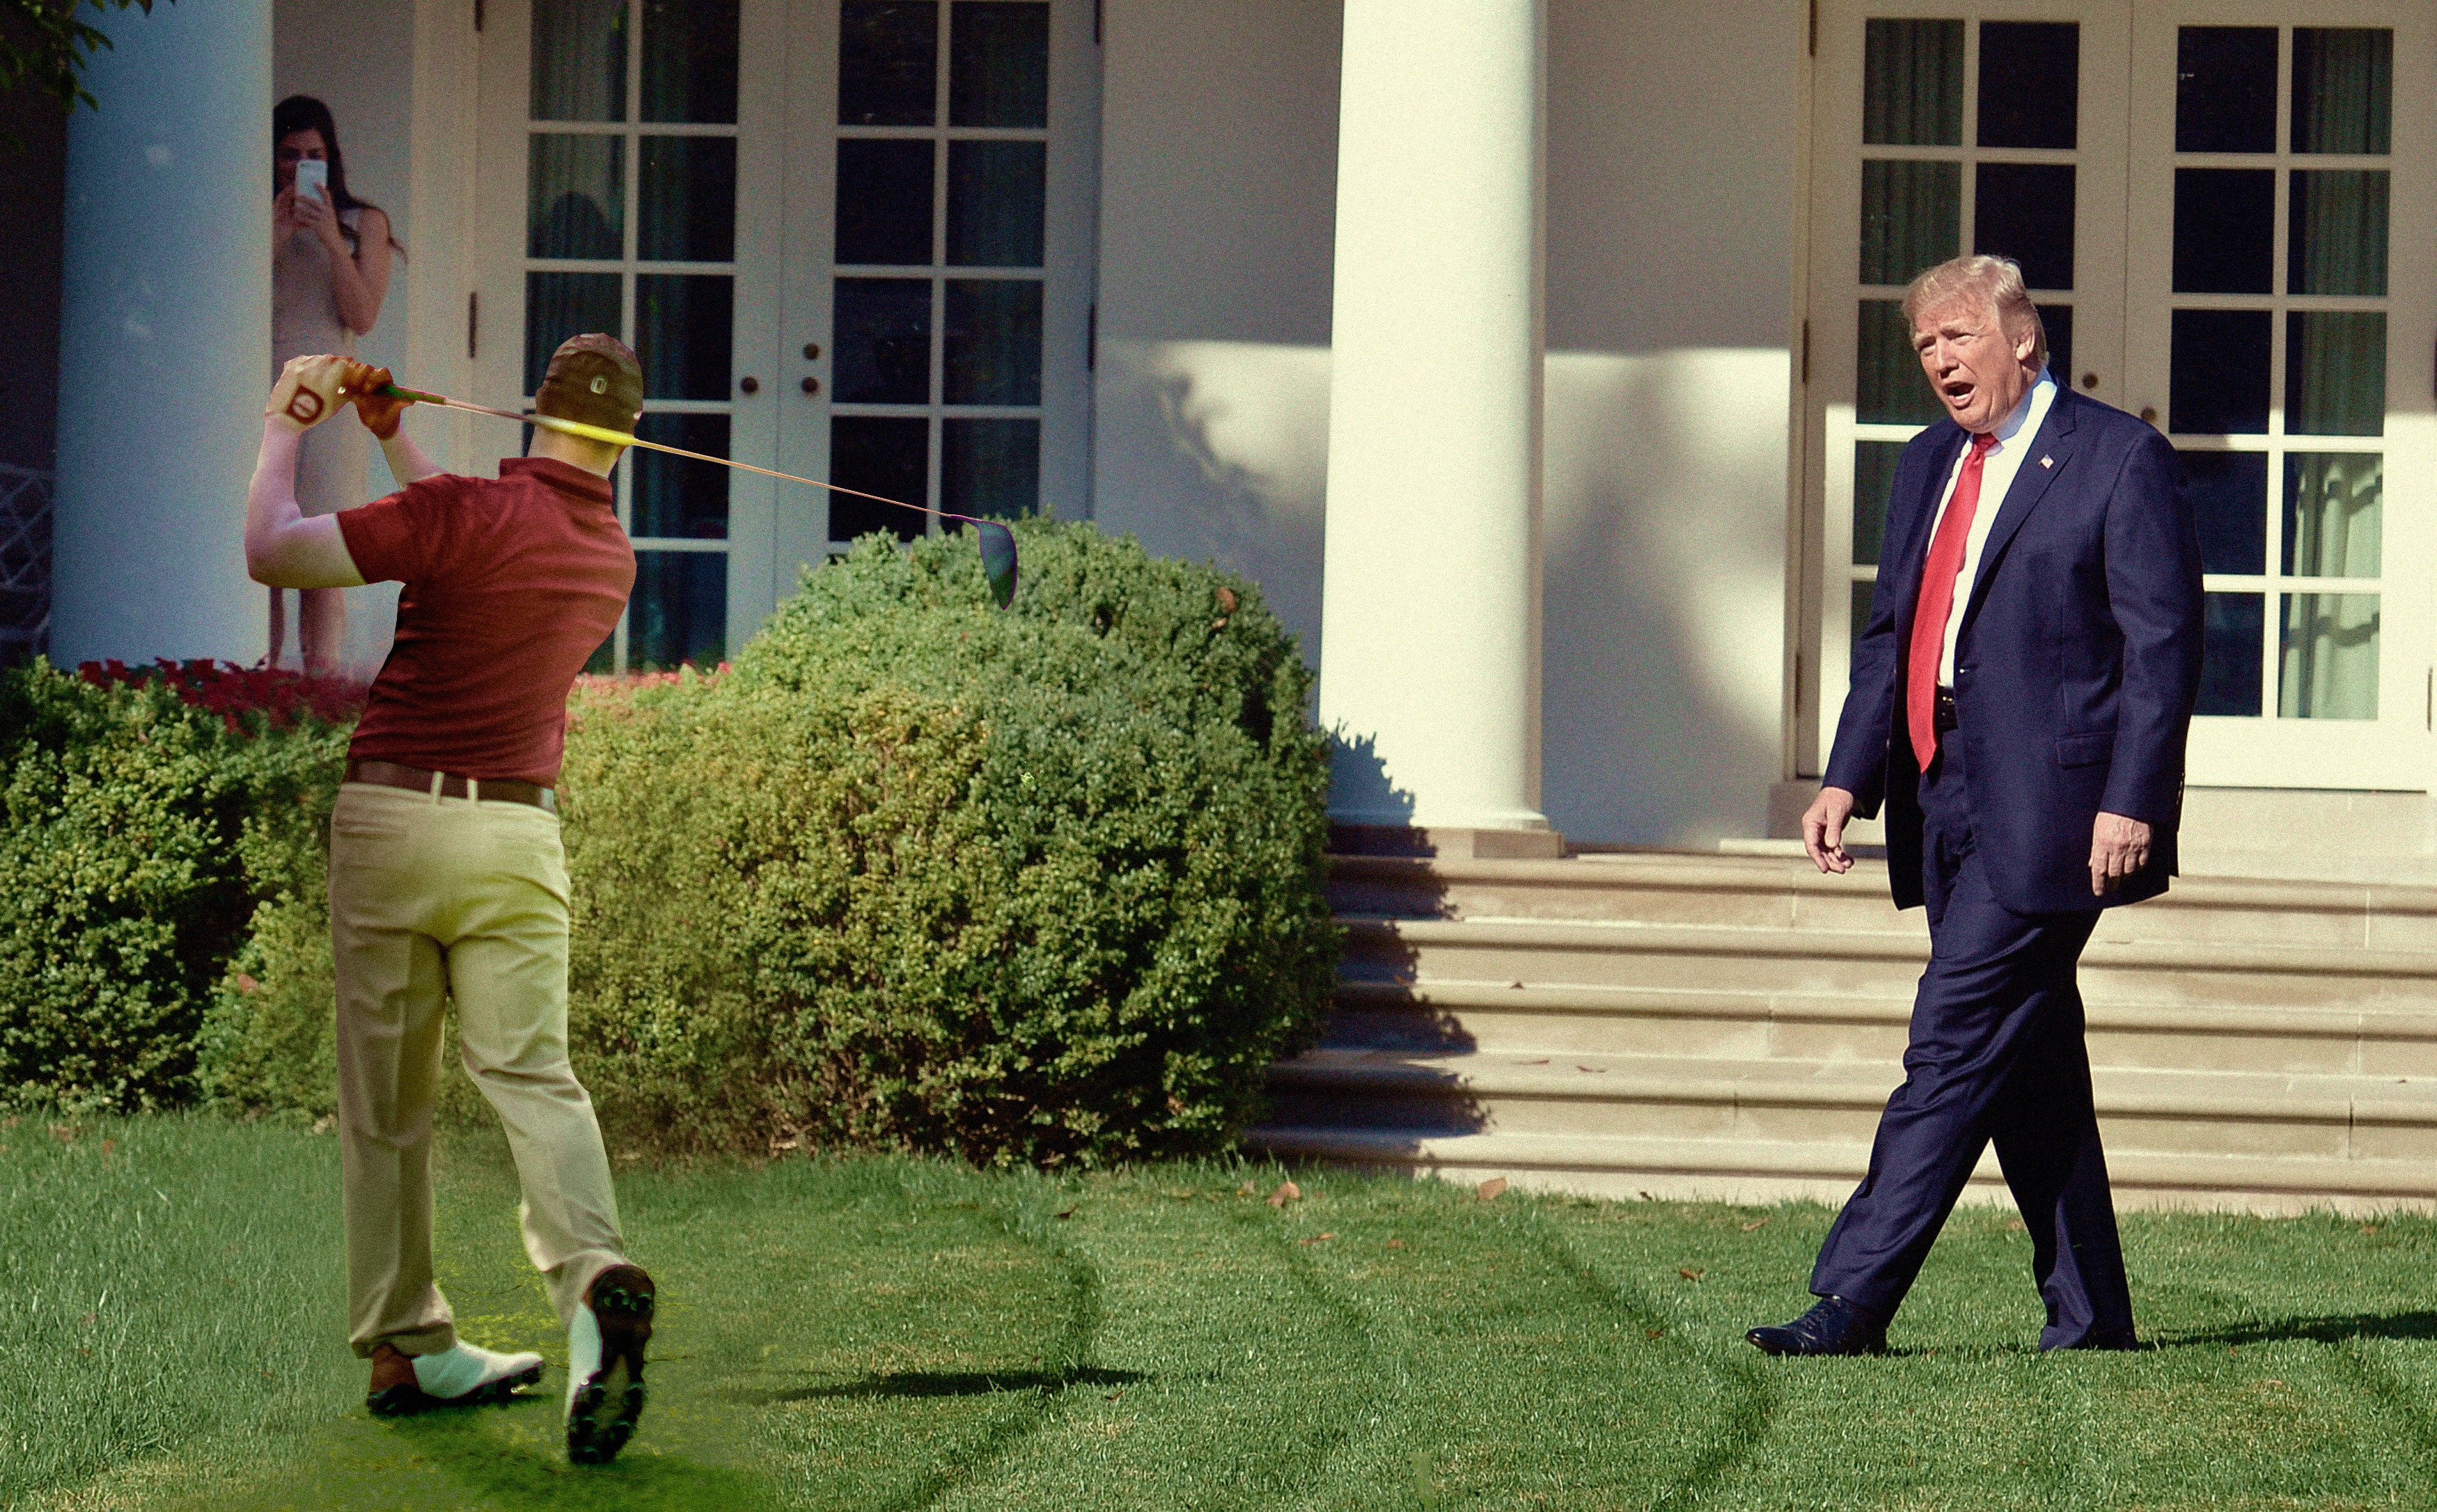 A photo illustration of former president Donald Trump, yelling in the direction of a super-imposed golf player.